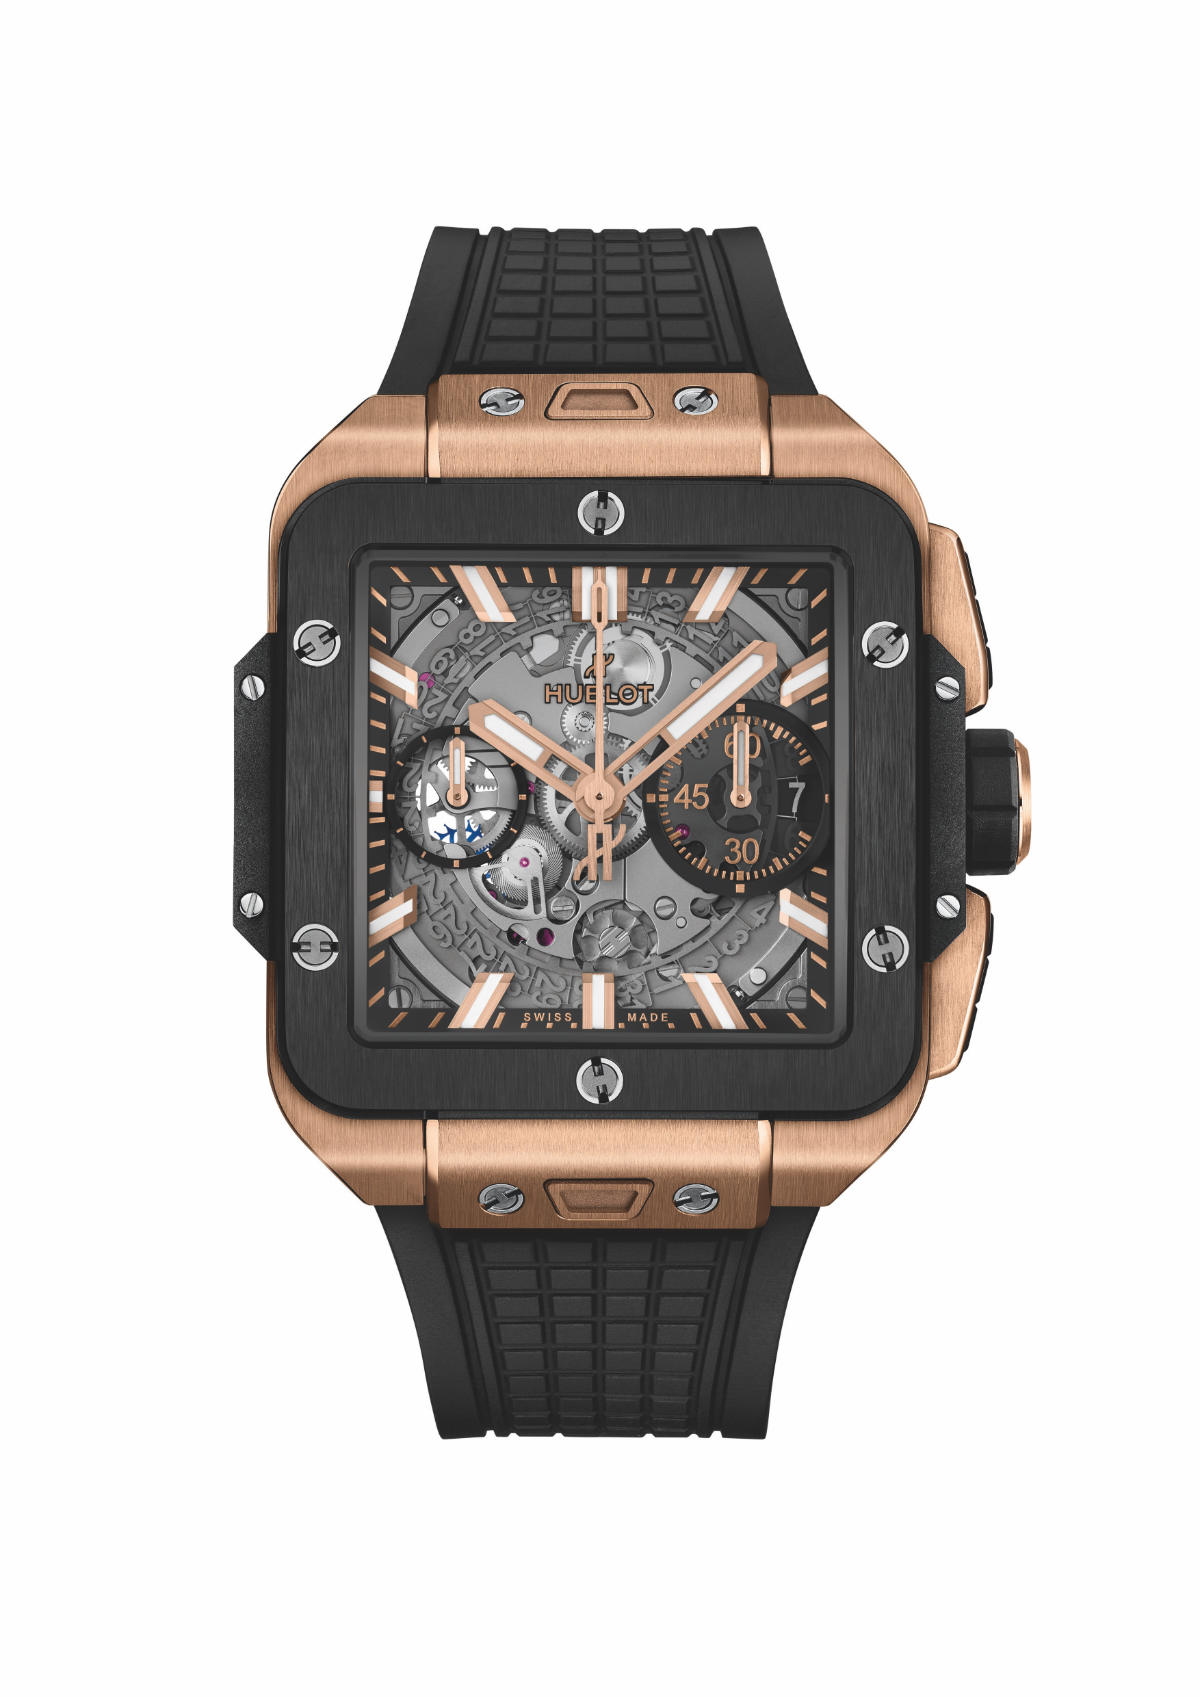 Hublot's Square Bang Unico: A New Watch-shape Takes Form At Watches & Wonders